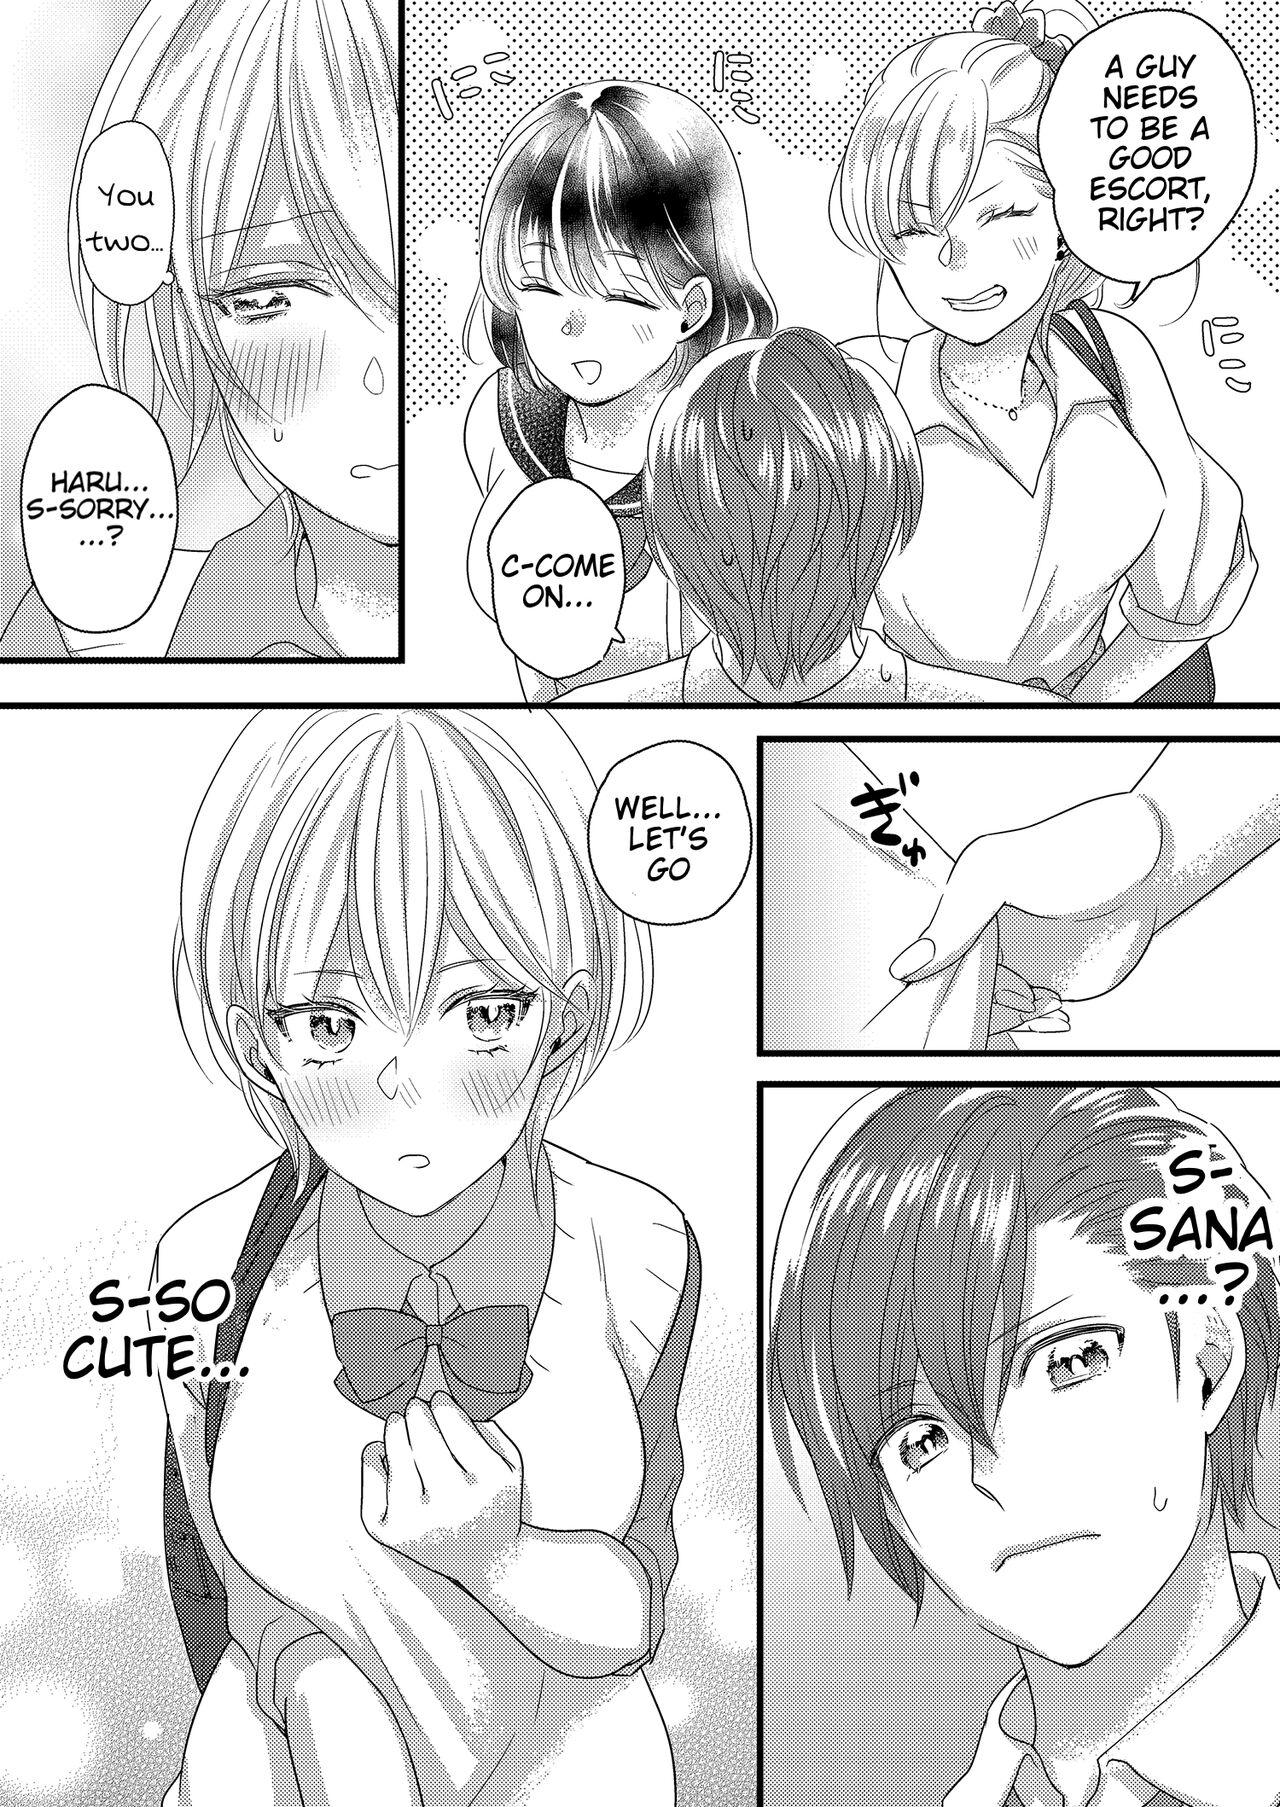 Perverted Haru and Sana ～Love Connected Through Cosplay～ - Original Culo - Picture 2